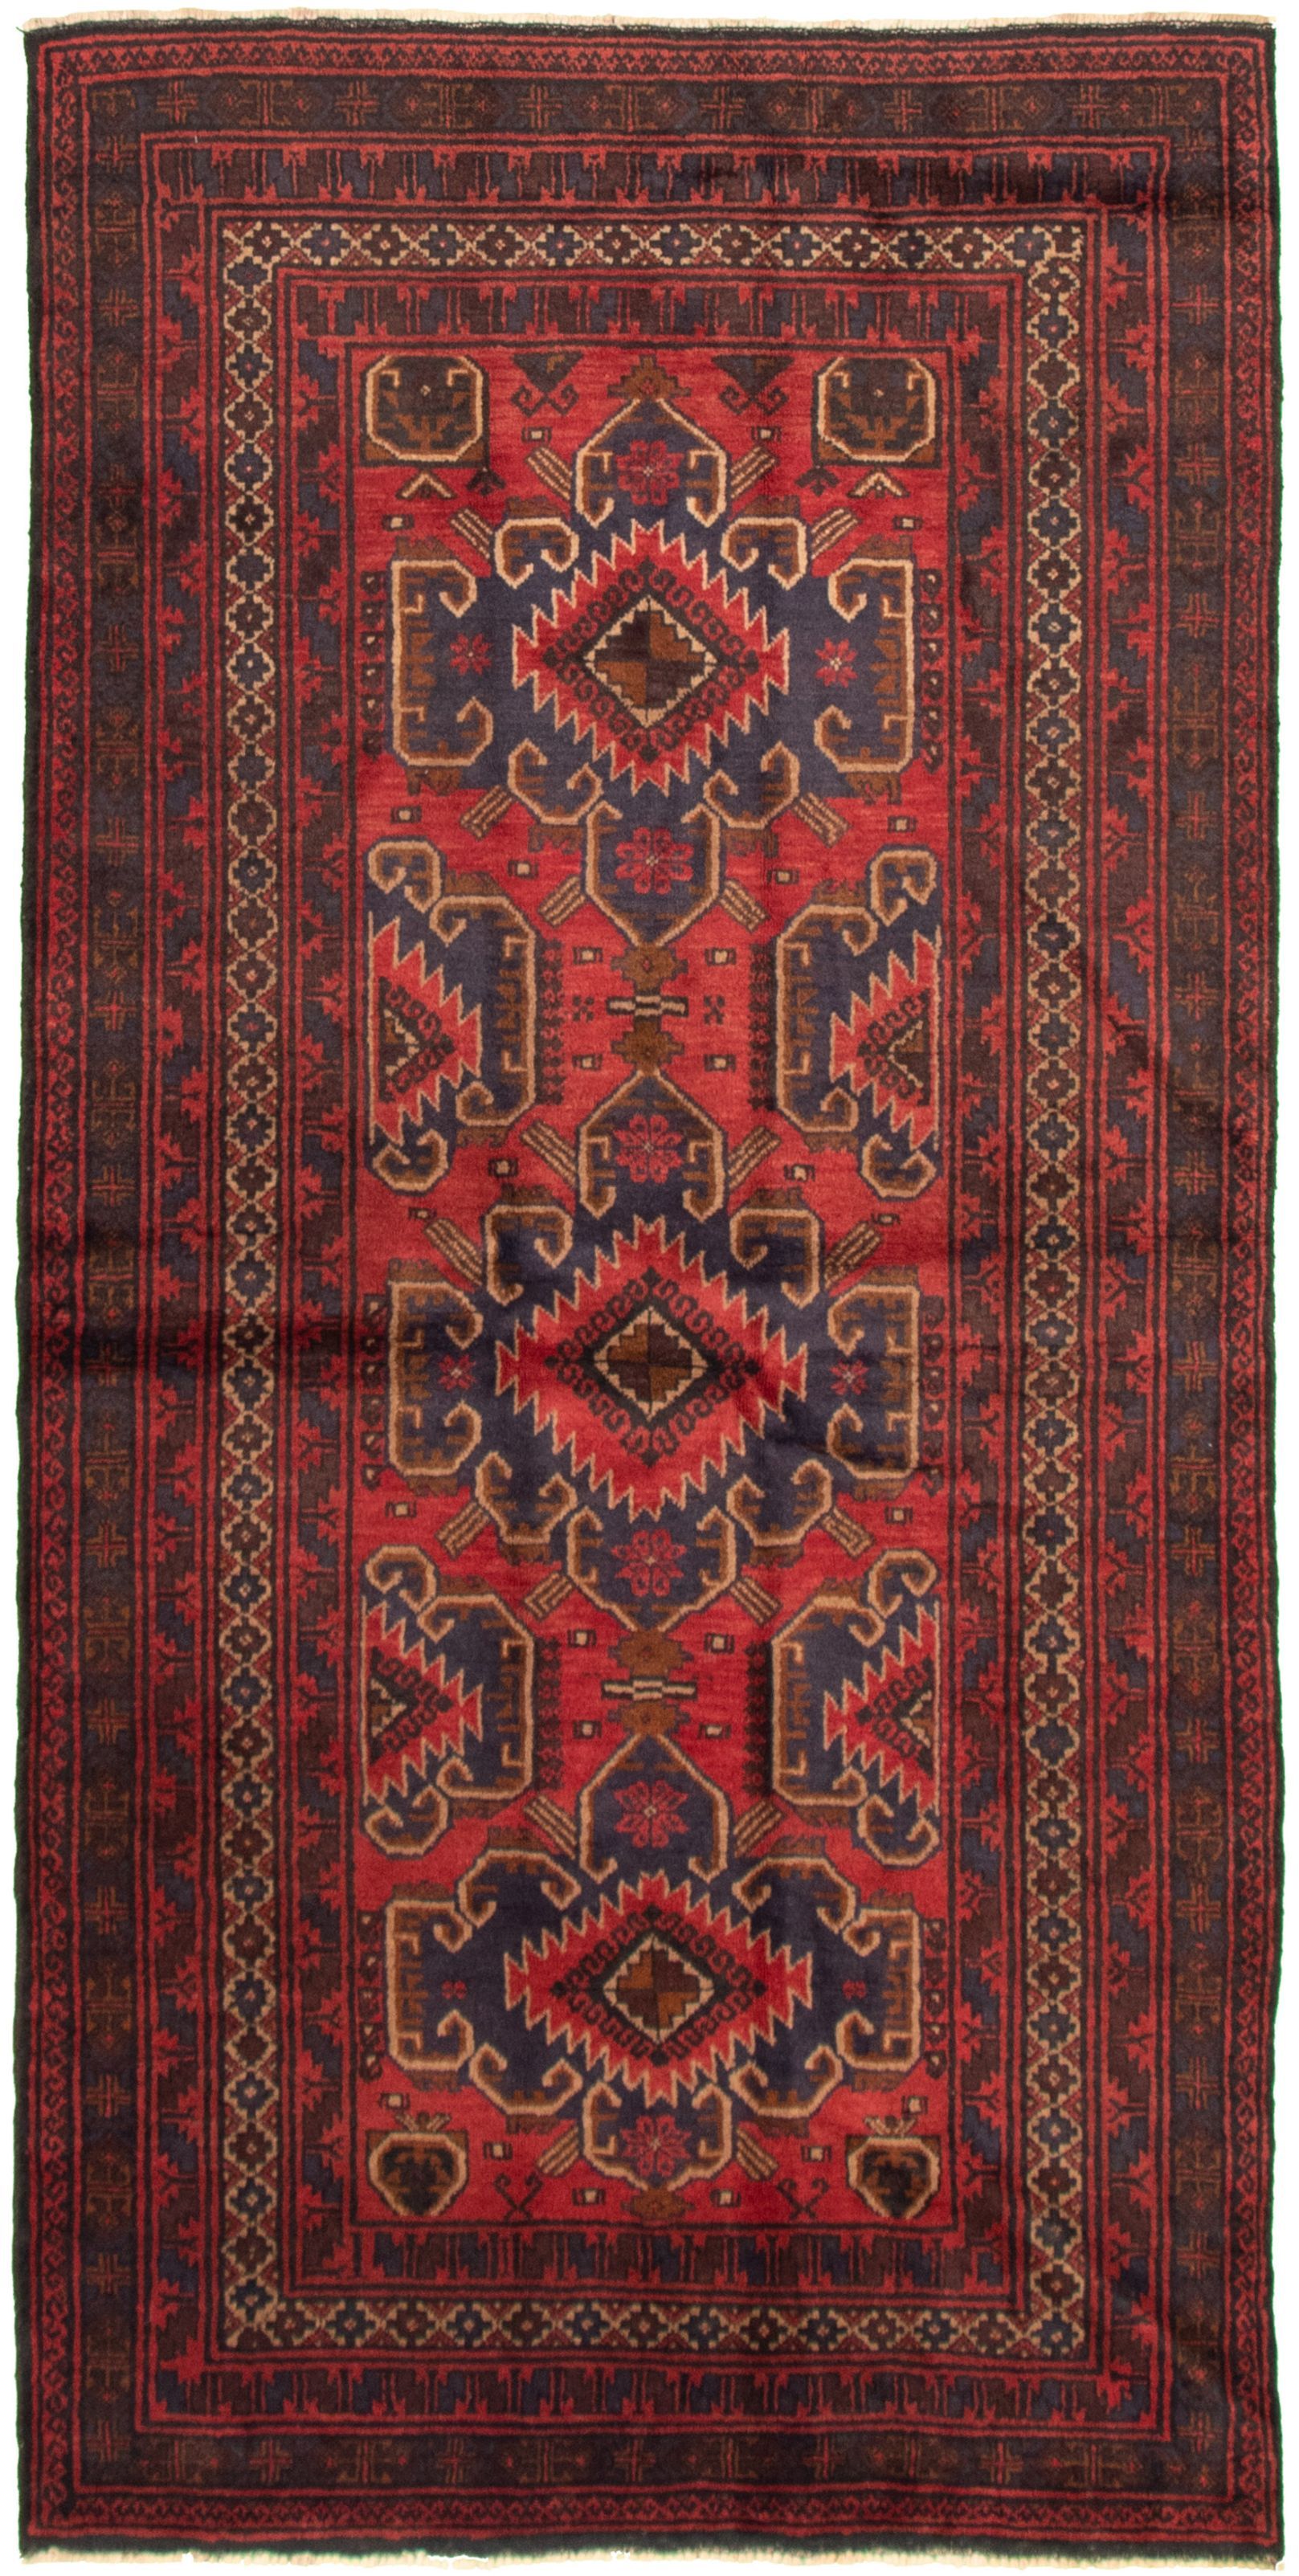 Hand Knotted Wool Red Rug Ecarpetgallery, Area Rugs 5 X 8 Under 100